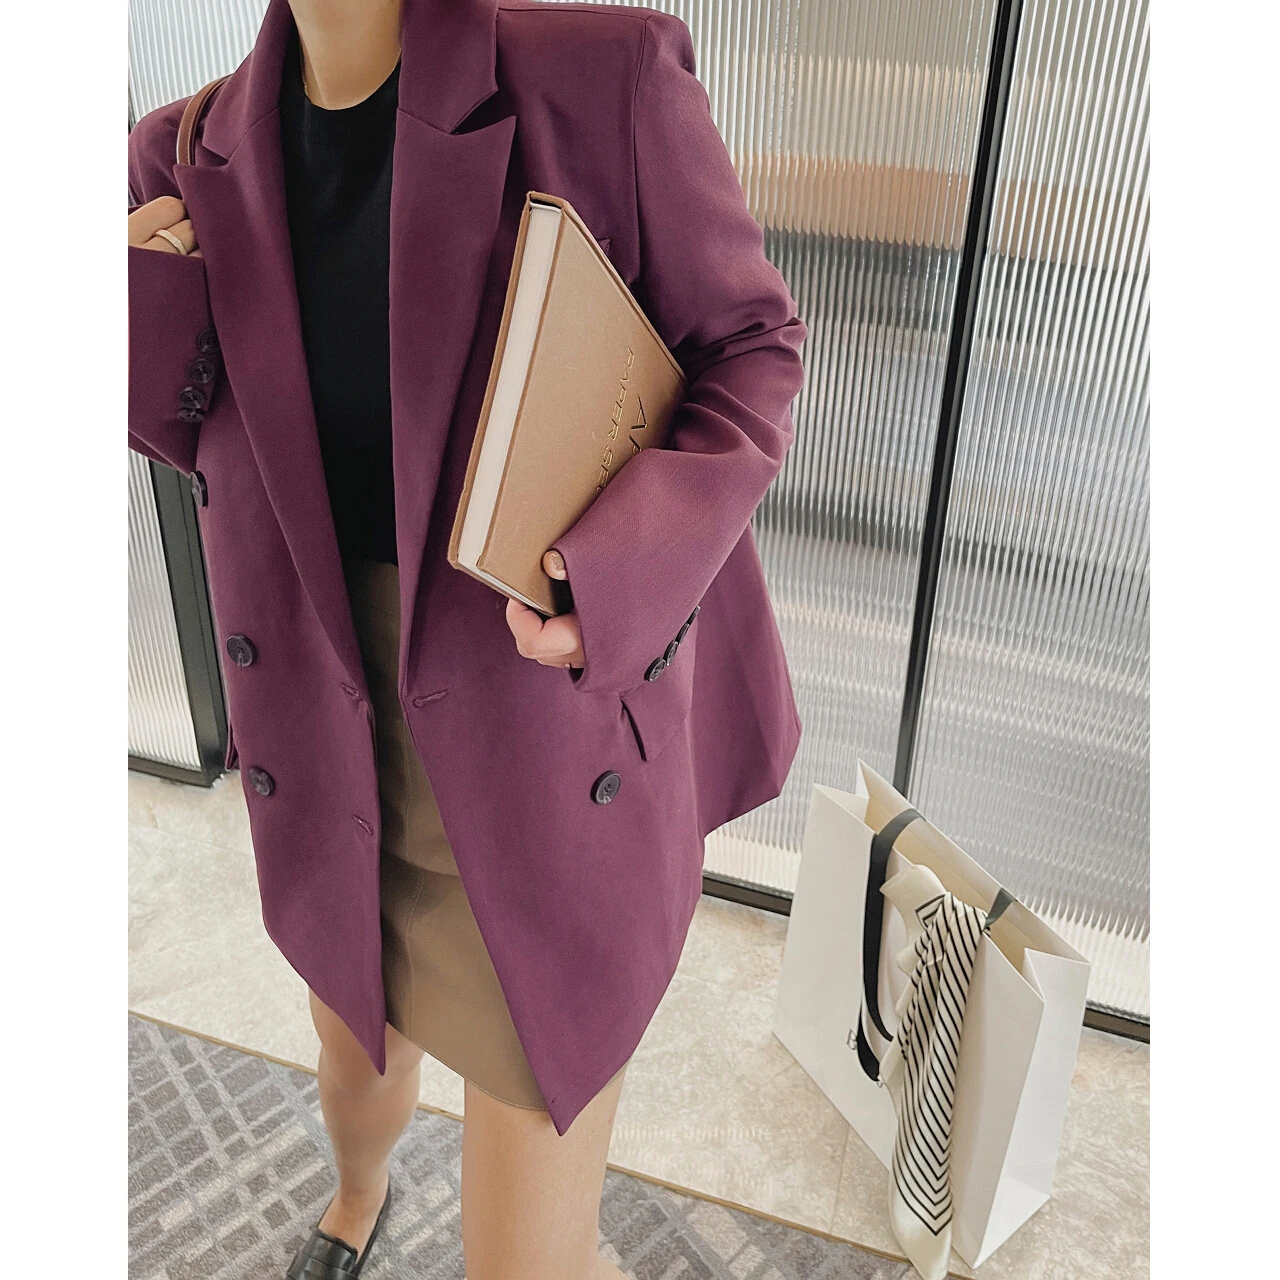 2022 Woman Oem Blazers Suits Coats Jackets Tailoring Overcoat Fashion Chic Elegant New Collection Stylish Clothing Autumn Y2k